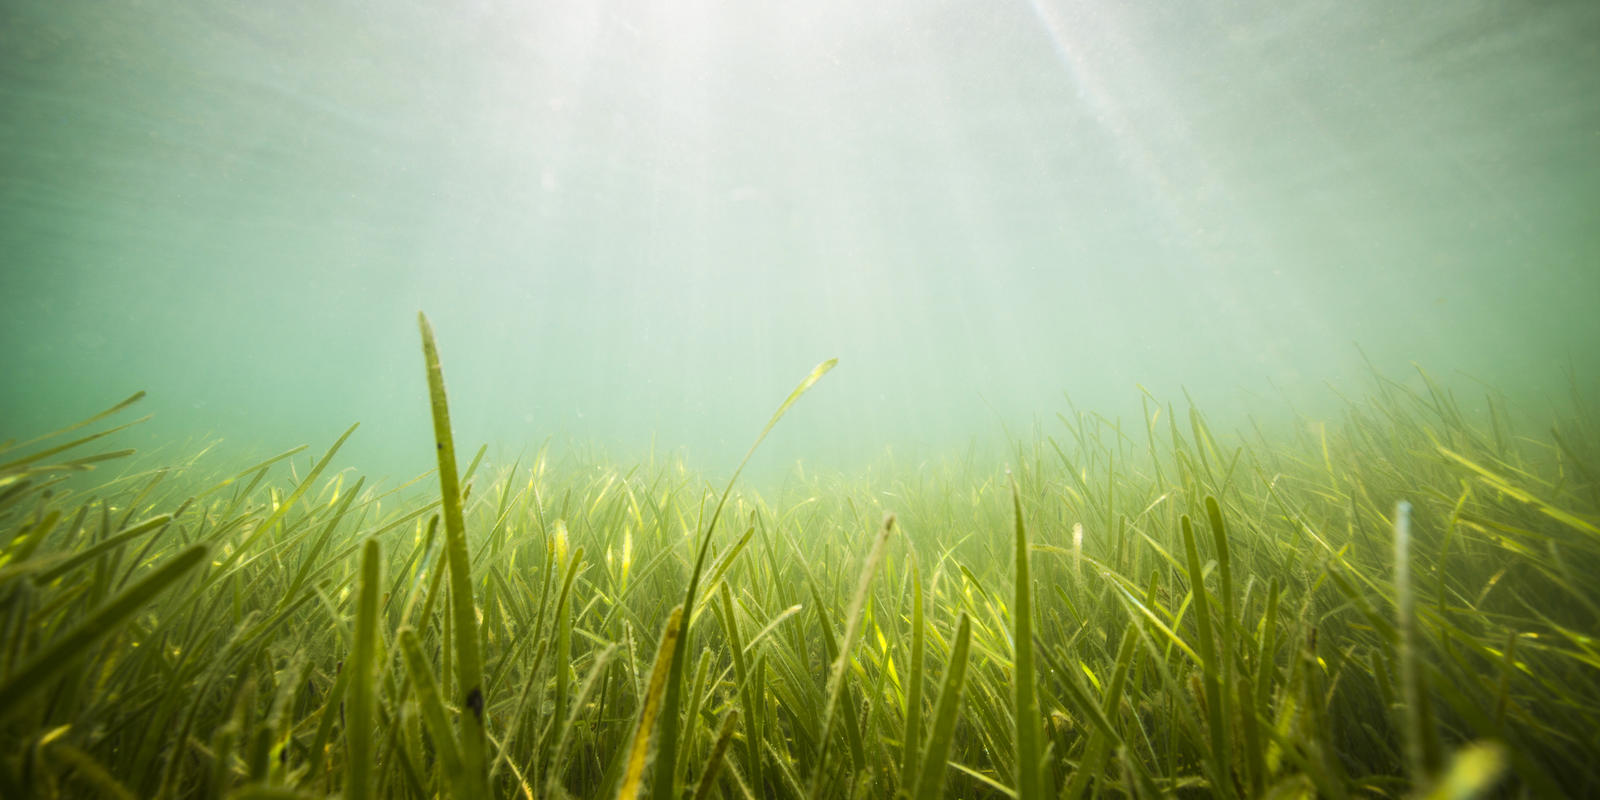 Project Seagrass is committed to the conservation of seagrass ecosystems and ensuring that the benefits they provide communities are sustained now and for the future.